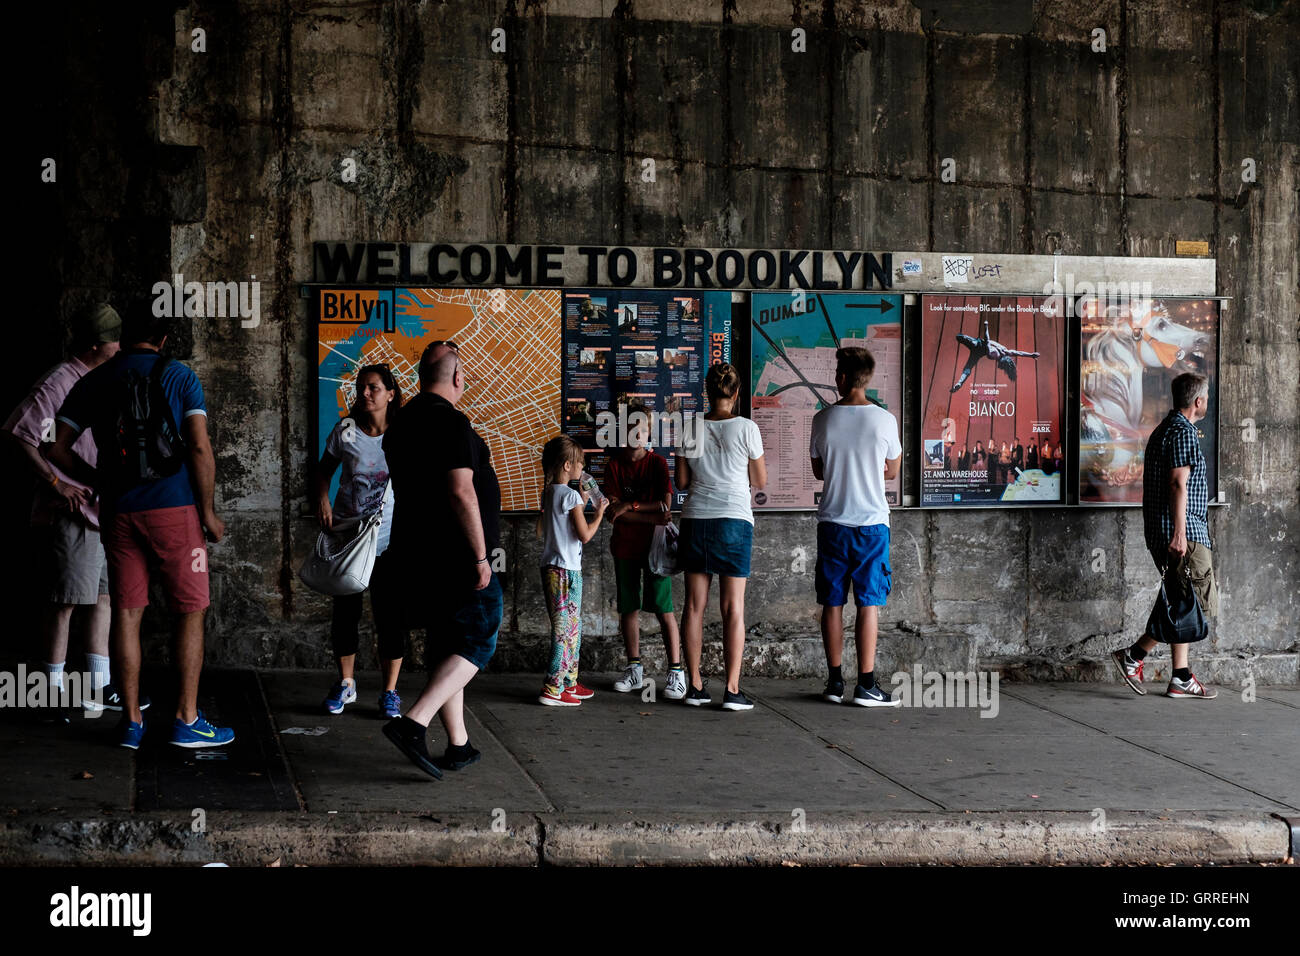 'Welcome to Brooklyn'. A sign under the Brooklyn Bridge after leaving the walkway from Manhatten Island Stock Photo